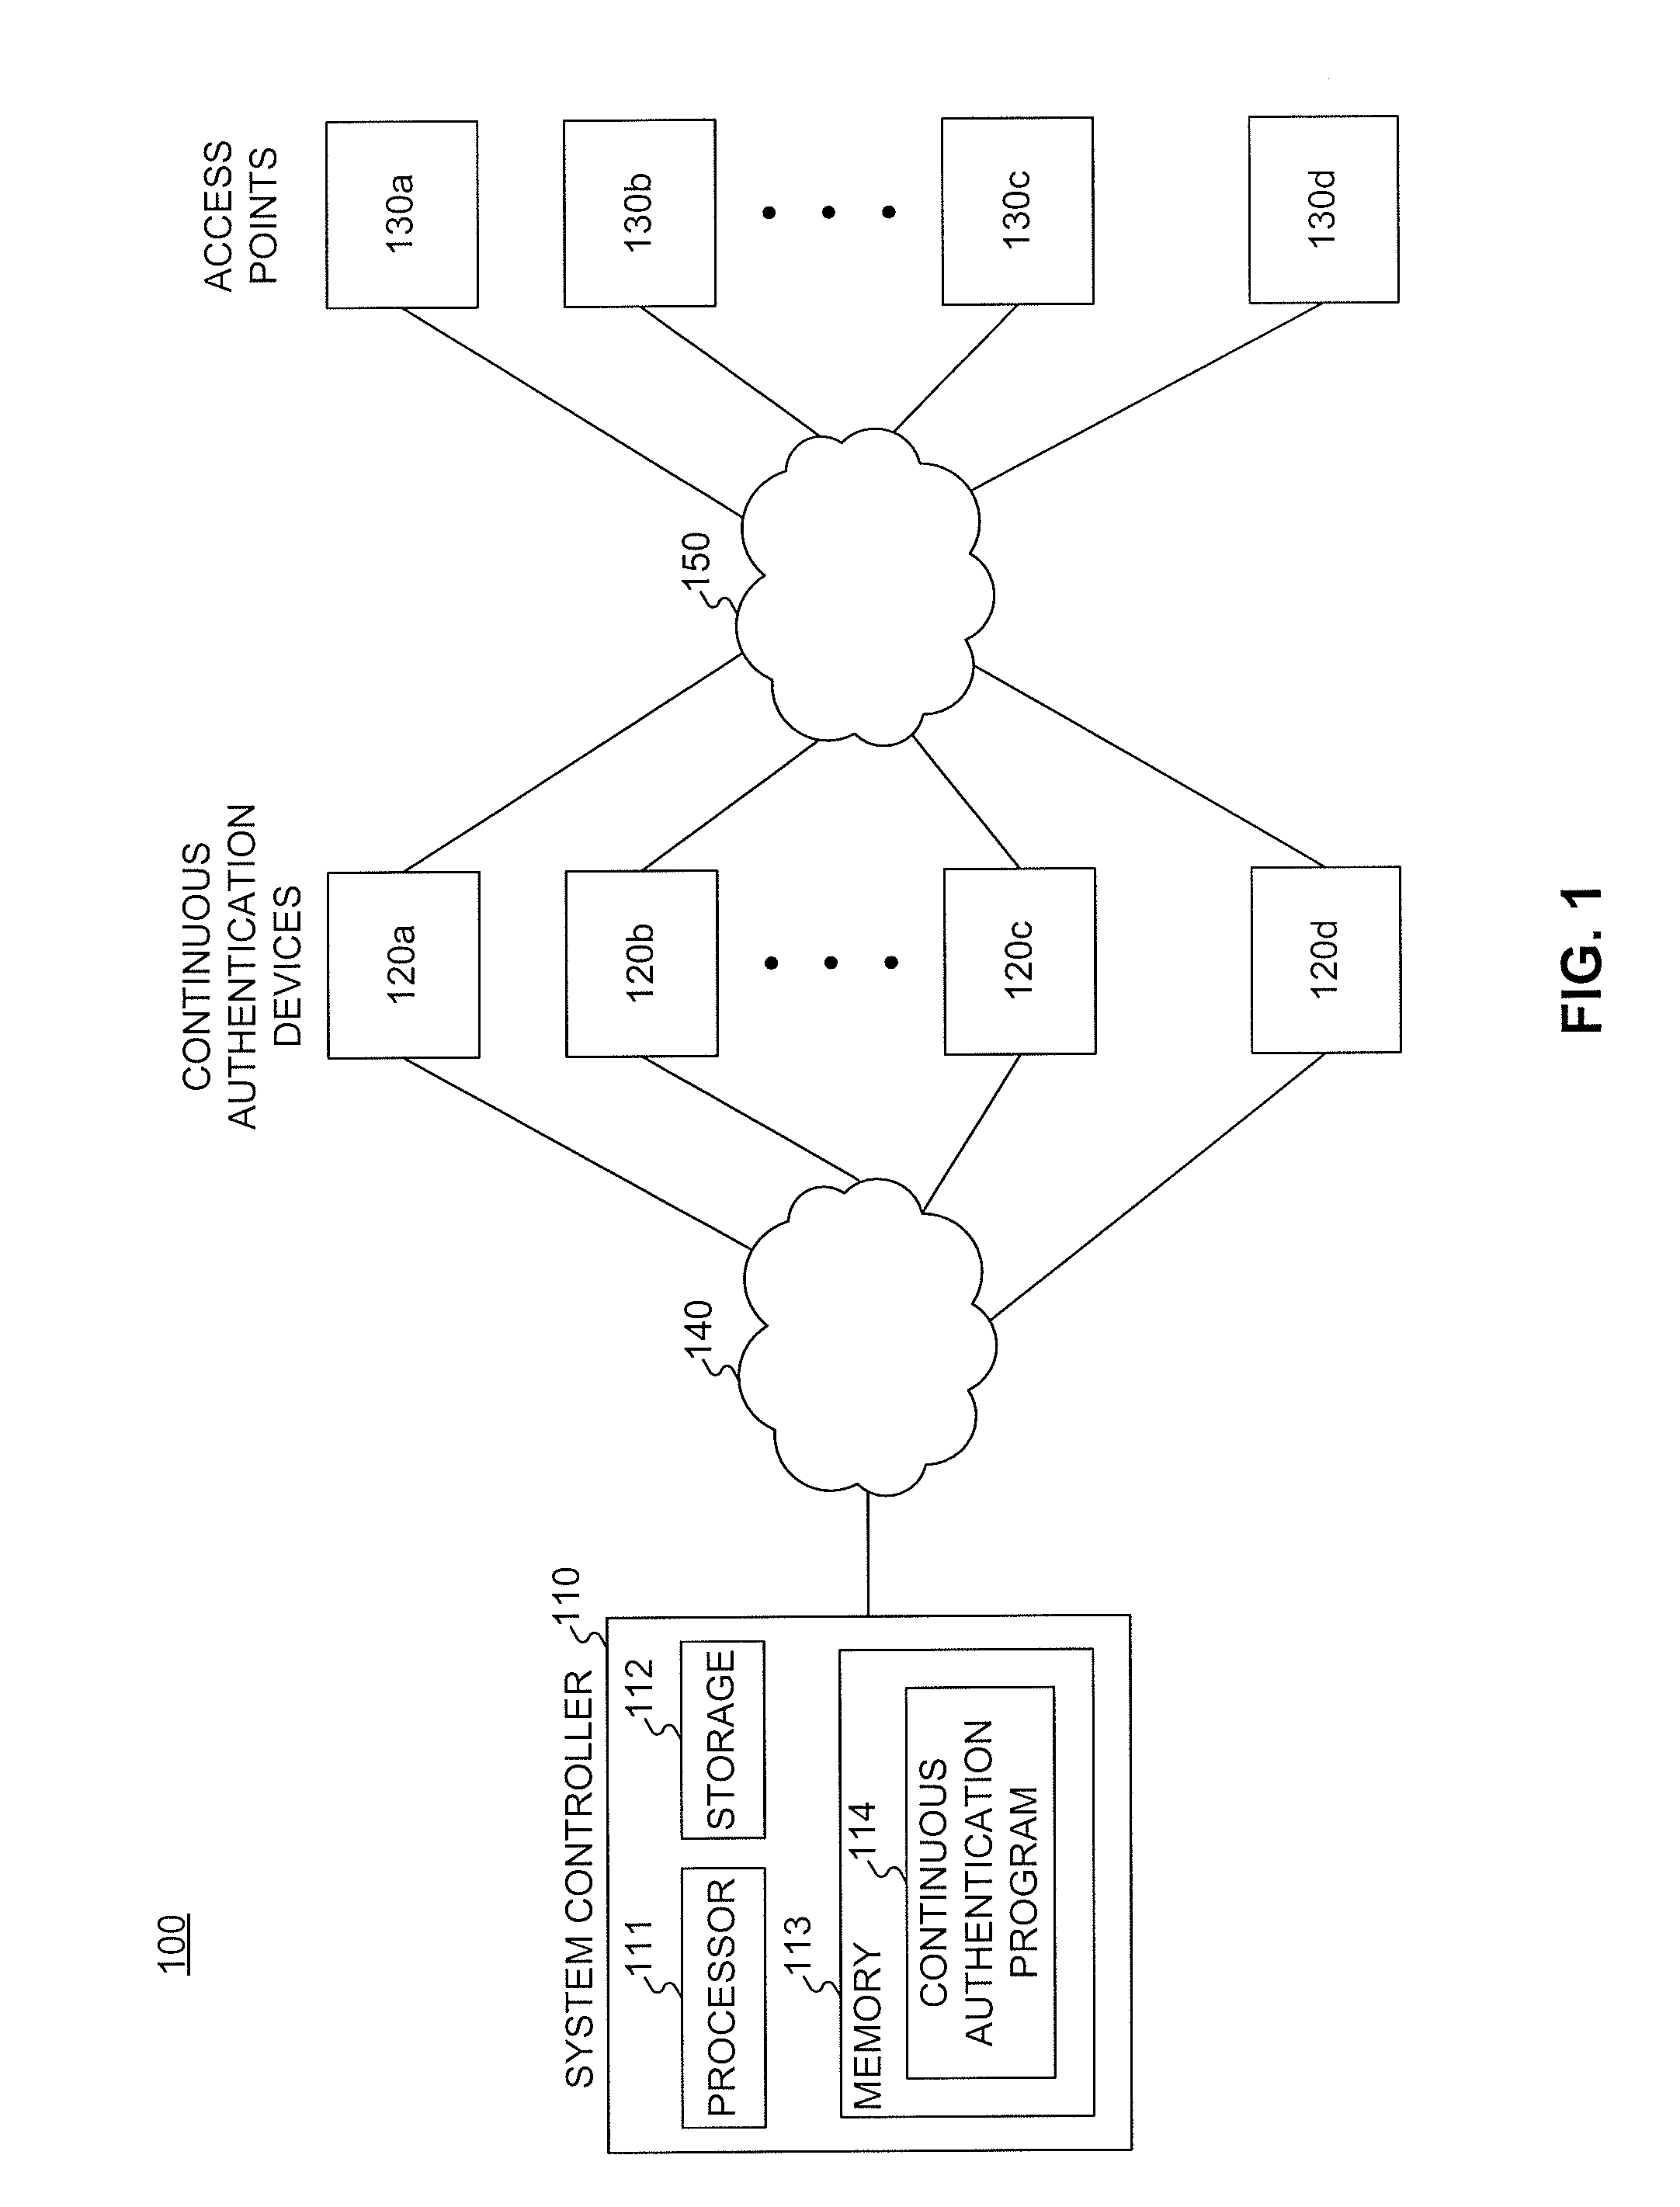 Systems, apparatus, and methods for continuous authentication